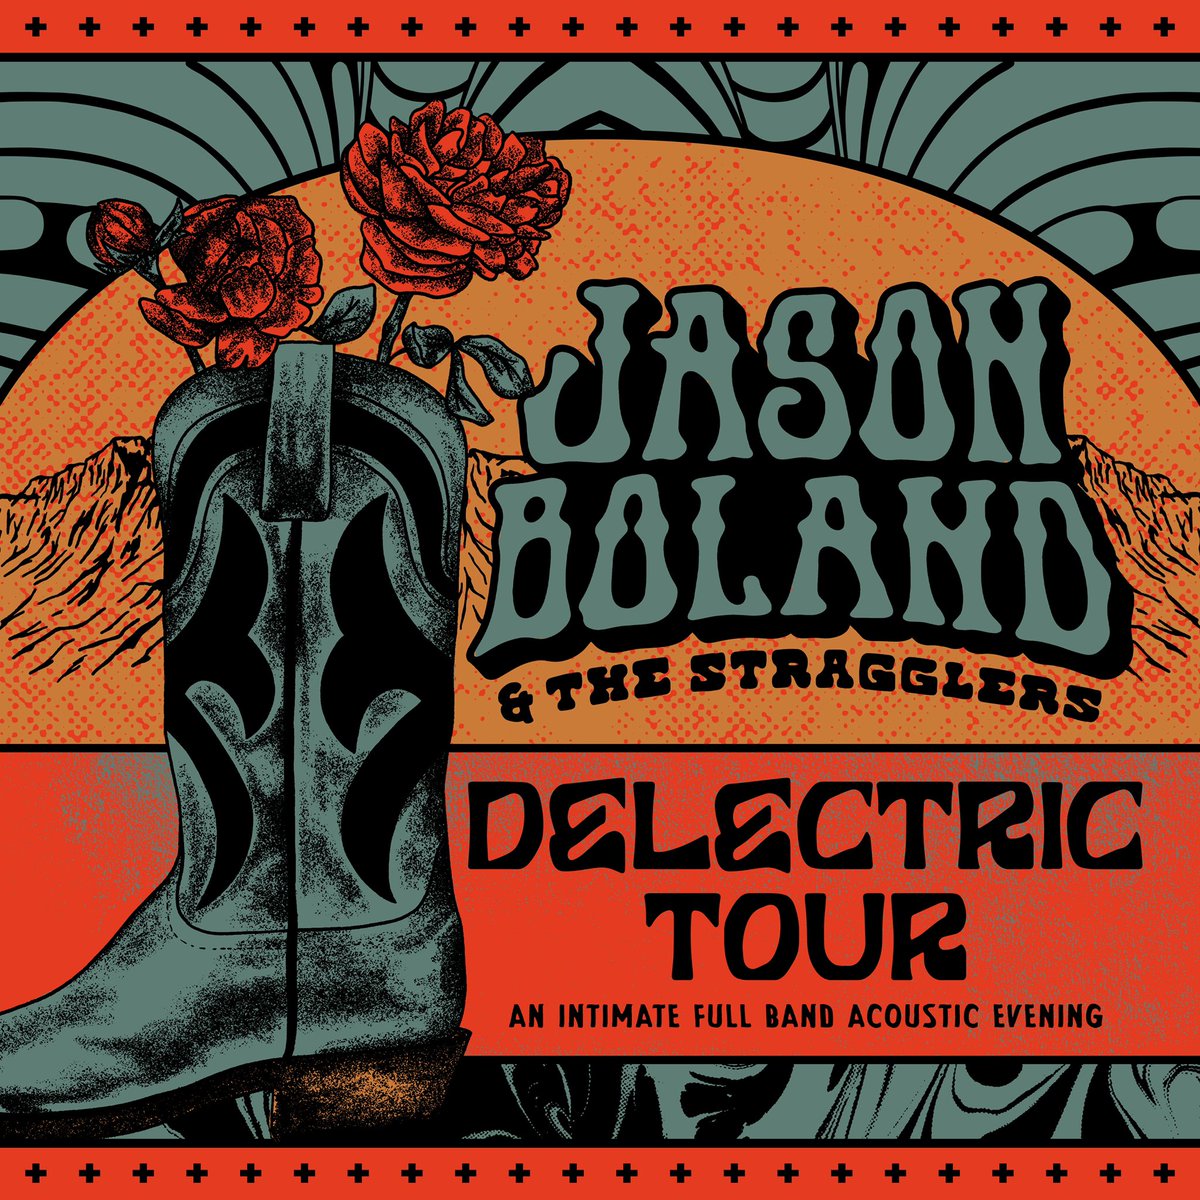 We’re proud to present the Delectric Tour. An intimate full-band acoustic evening w/ Jason Boland & The Stragglers. Limited to selected cities so grab your tickets & don’t miss the chance to experience Stragglers history in 2023. thestragglers.com/tour